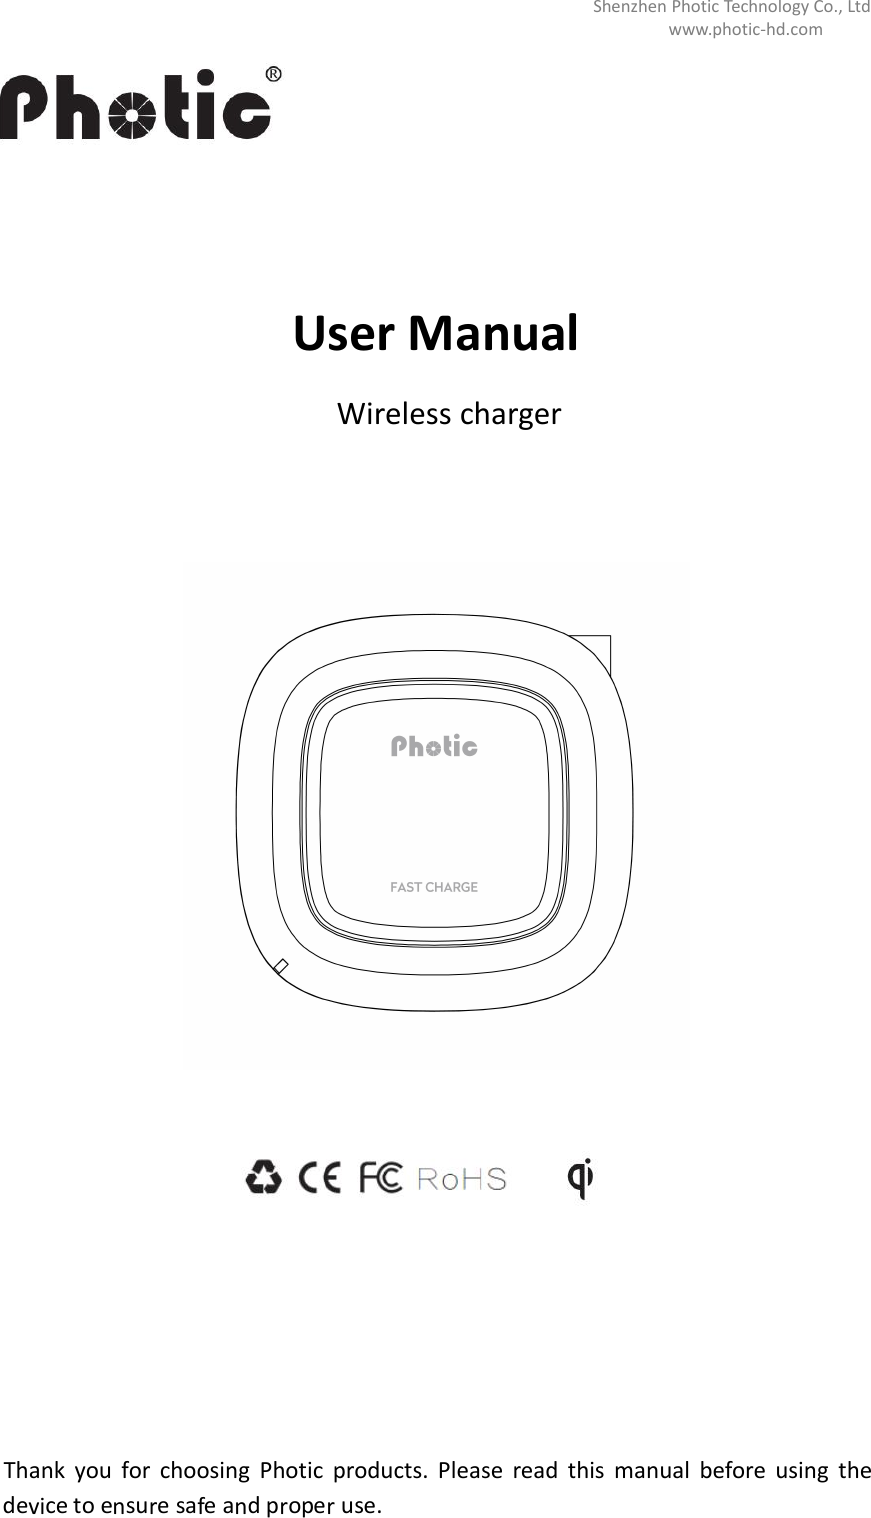 Shenzhen Photic Technology Co., Ltdwww.photic-hd.comUser ManualWireless chargerThank you for choosing Photic products. Please read this manual before using thedevice to ensure safe andproperuse.